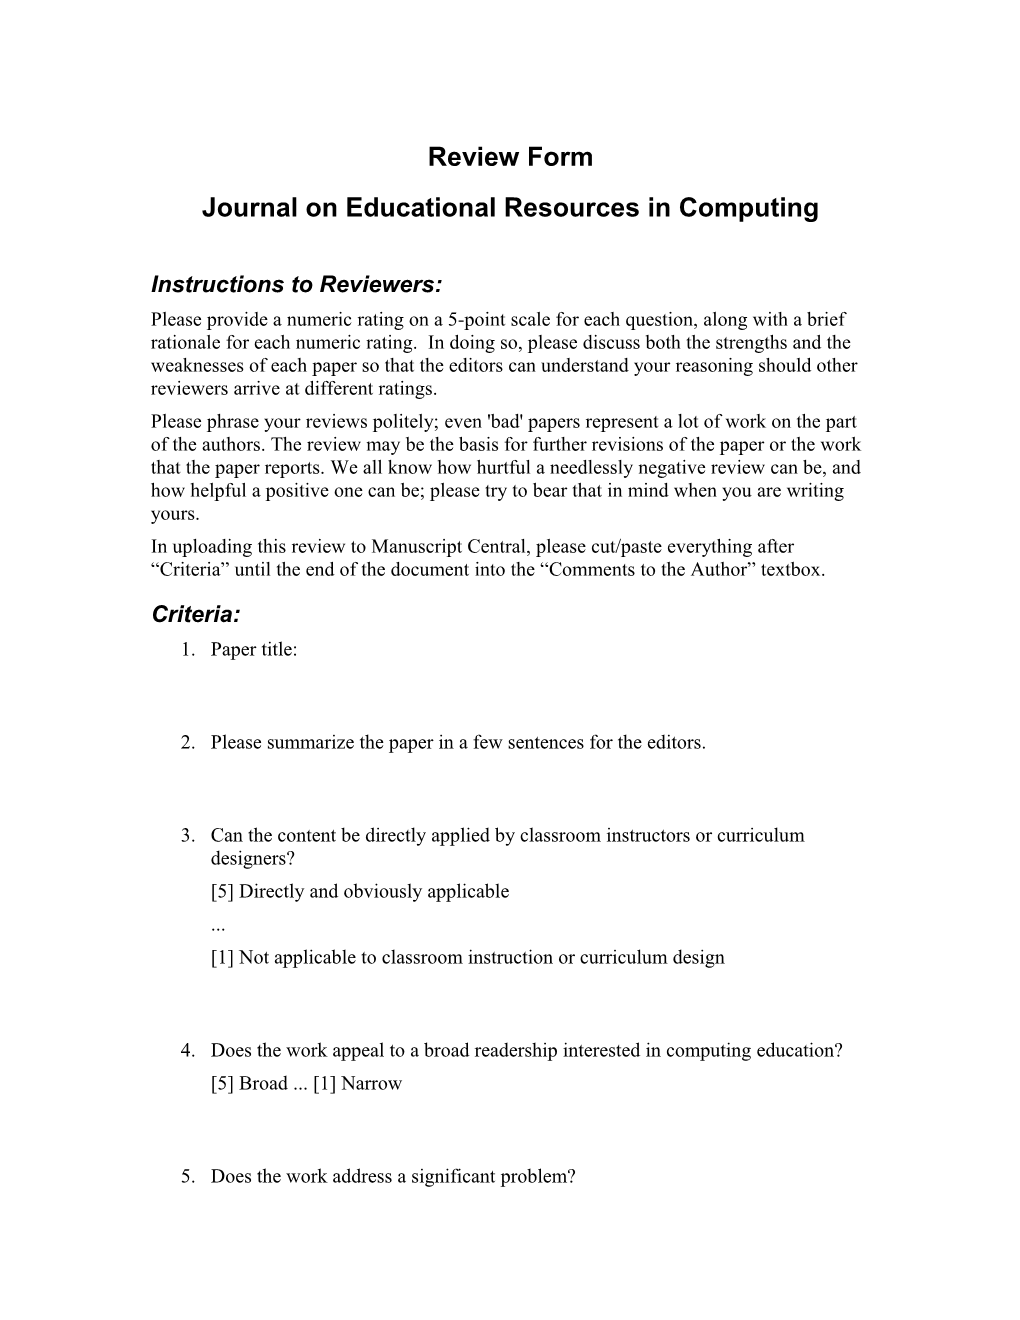 Journal on Educational Resources in Computing